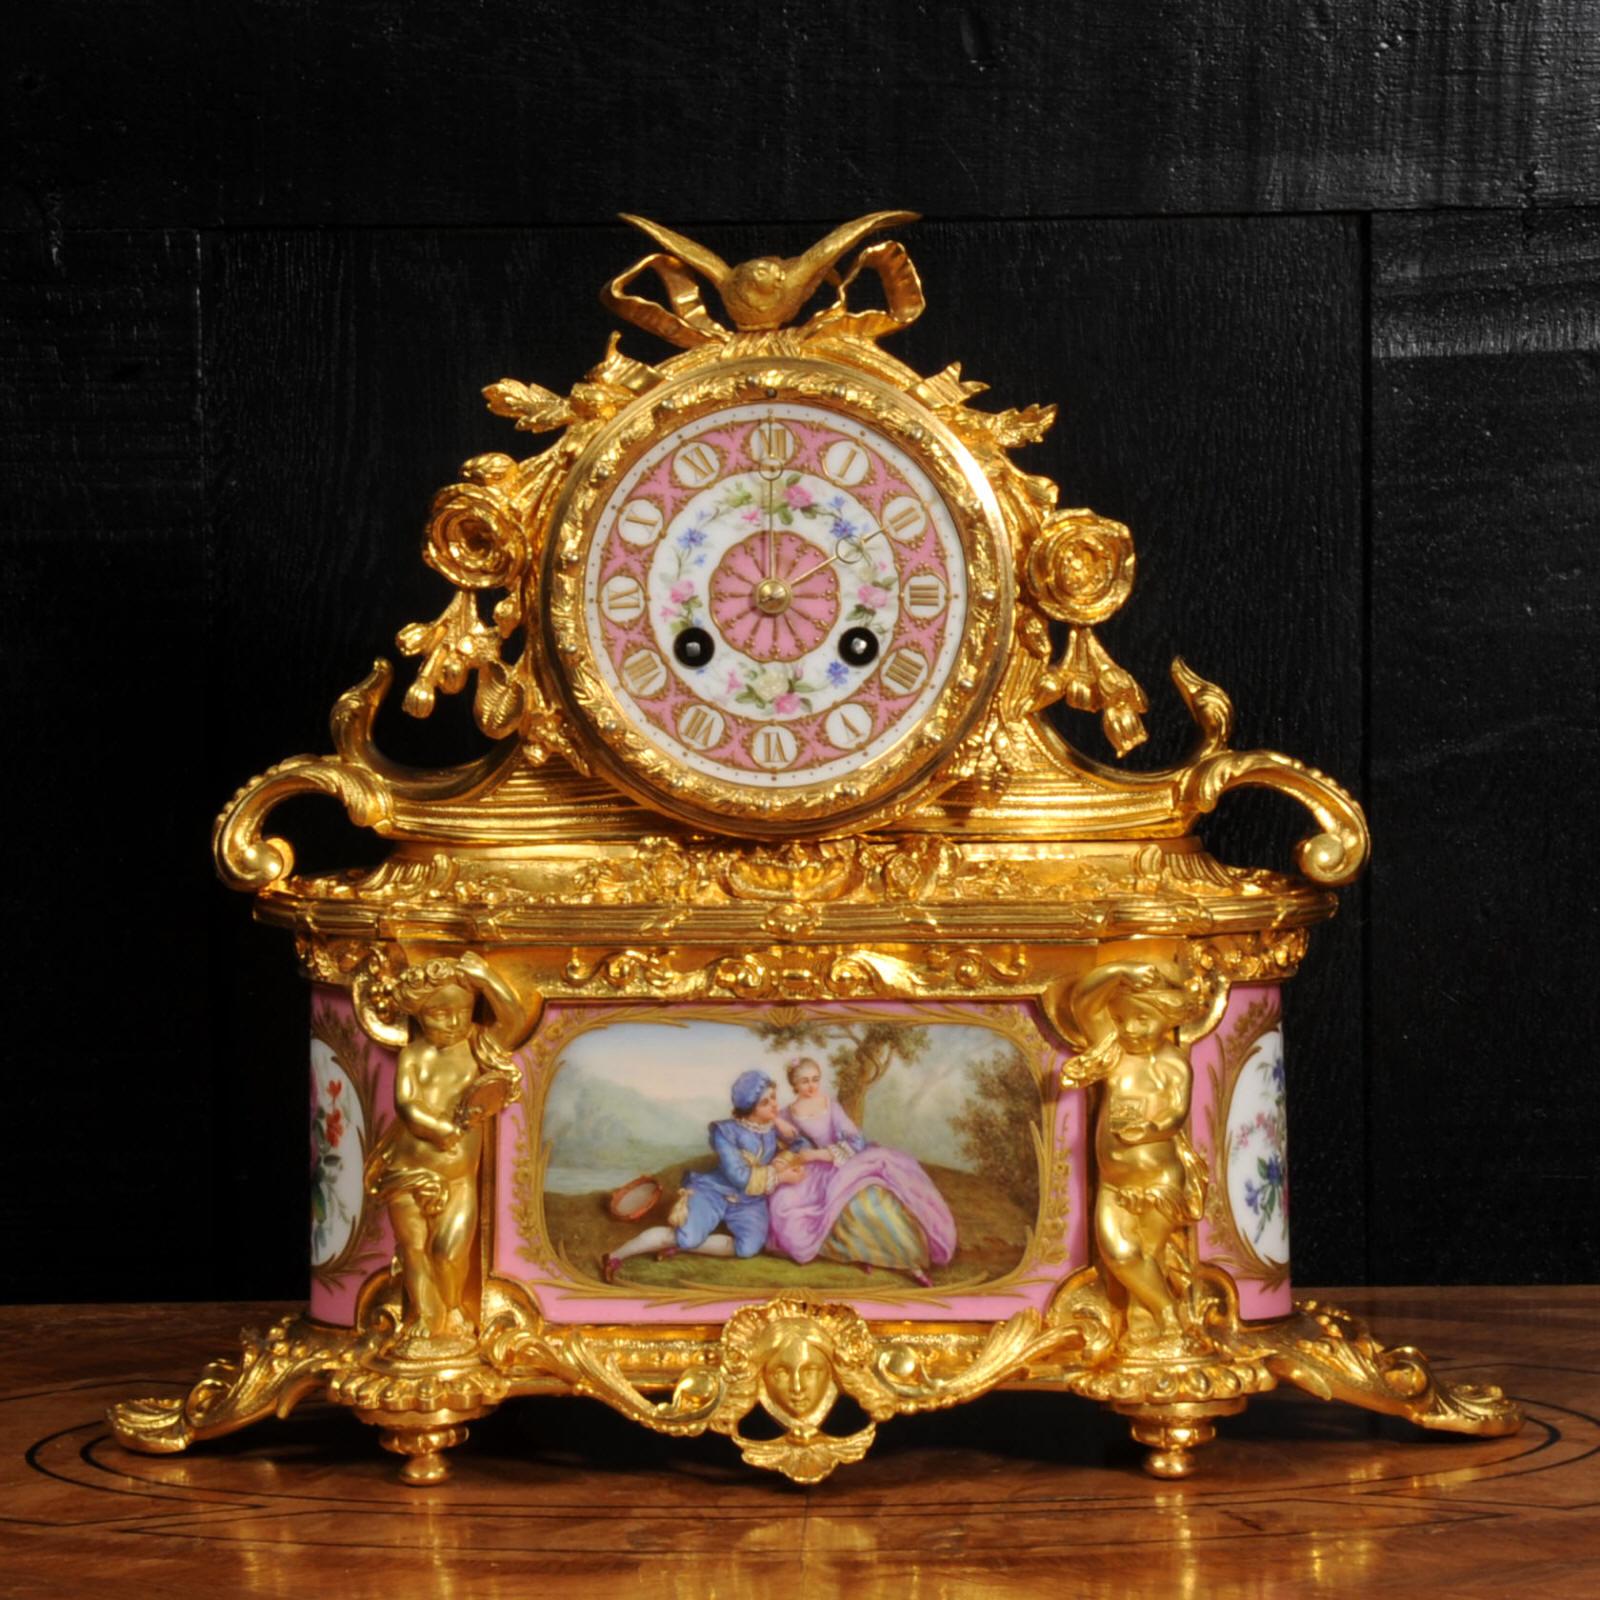 A beautiful original antique French boudoir clock, circa 1860. It is made of exquisite ormolu (finely gilded bronze) mounted with delicately painted Sèvres style porcelain with a pompadour rose pink ground. The panel below the dial is finely painted